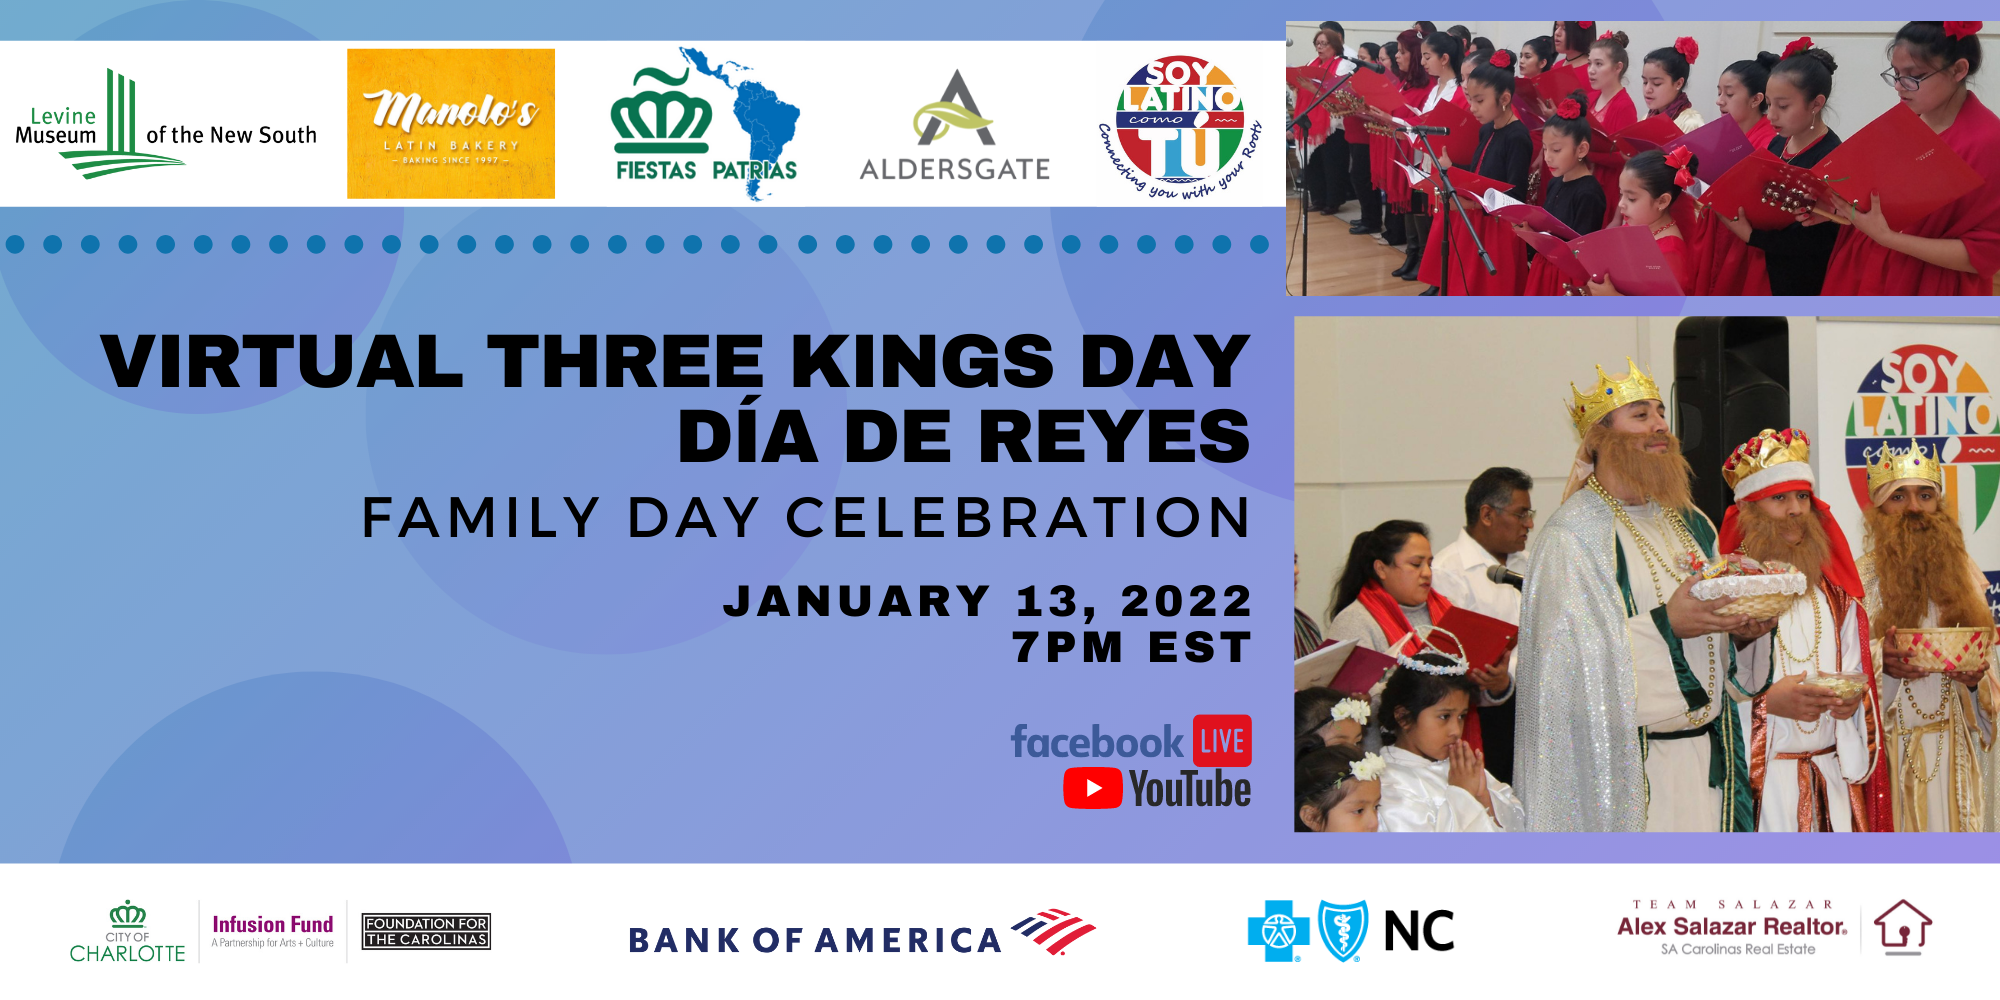 Levine Museum of the New South Virtual Three Kings Day, Dia De Reyes Event Image